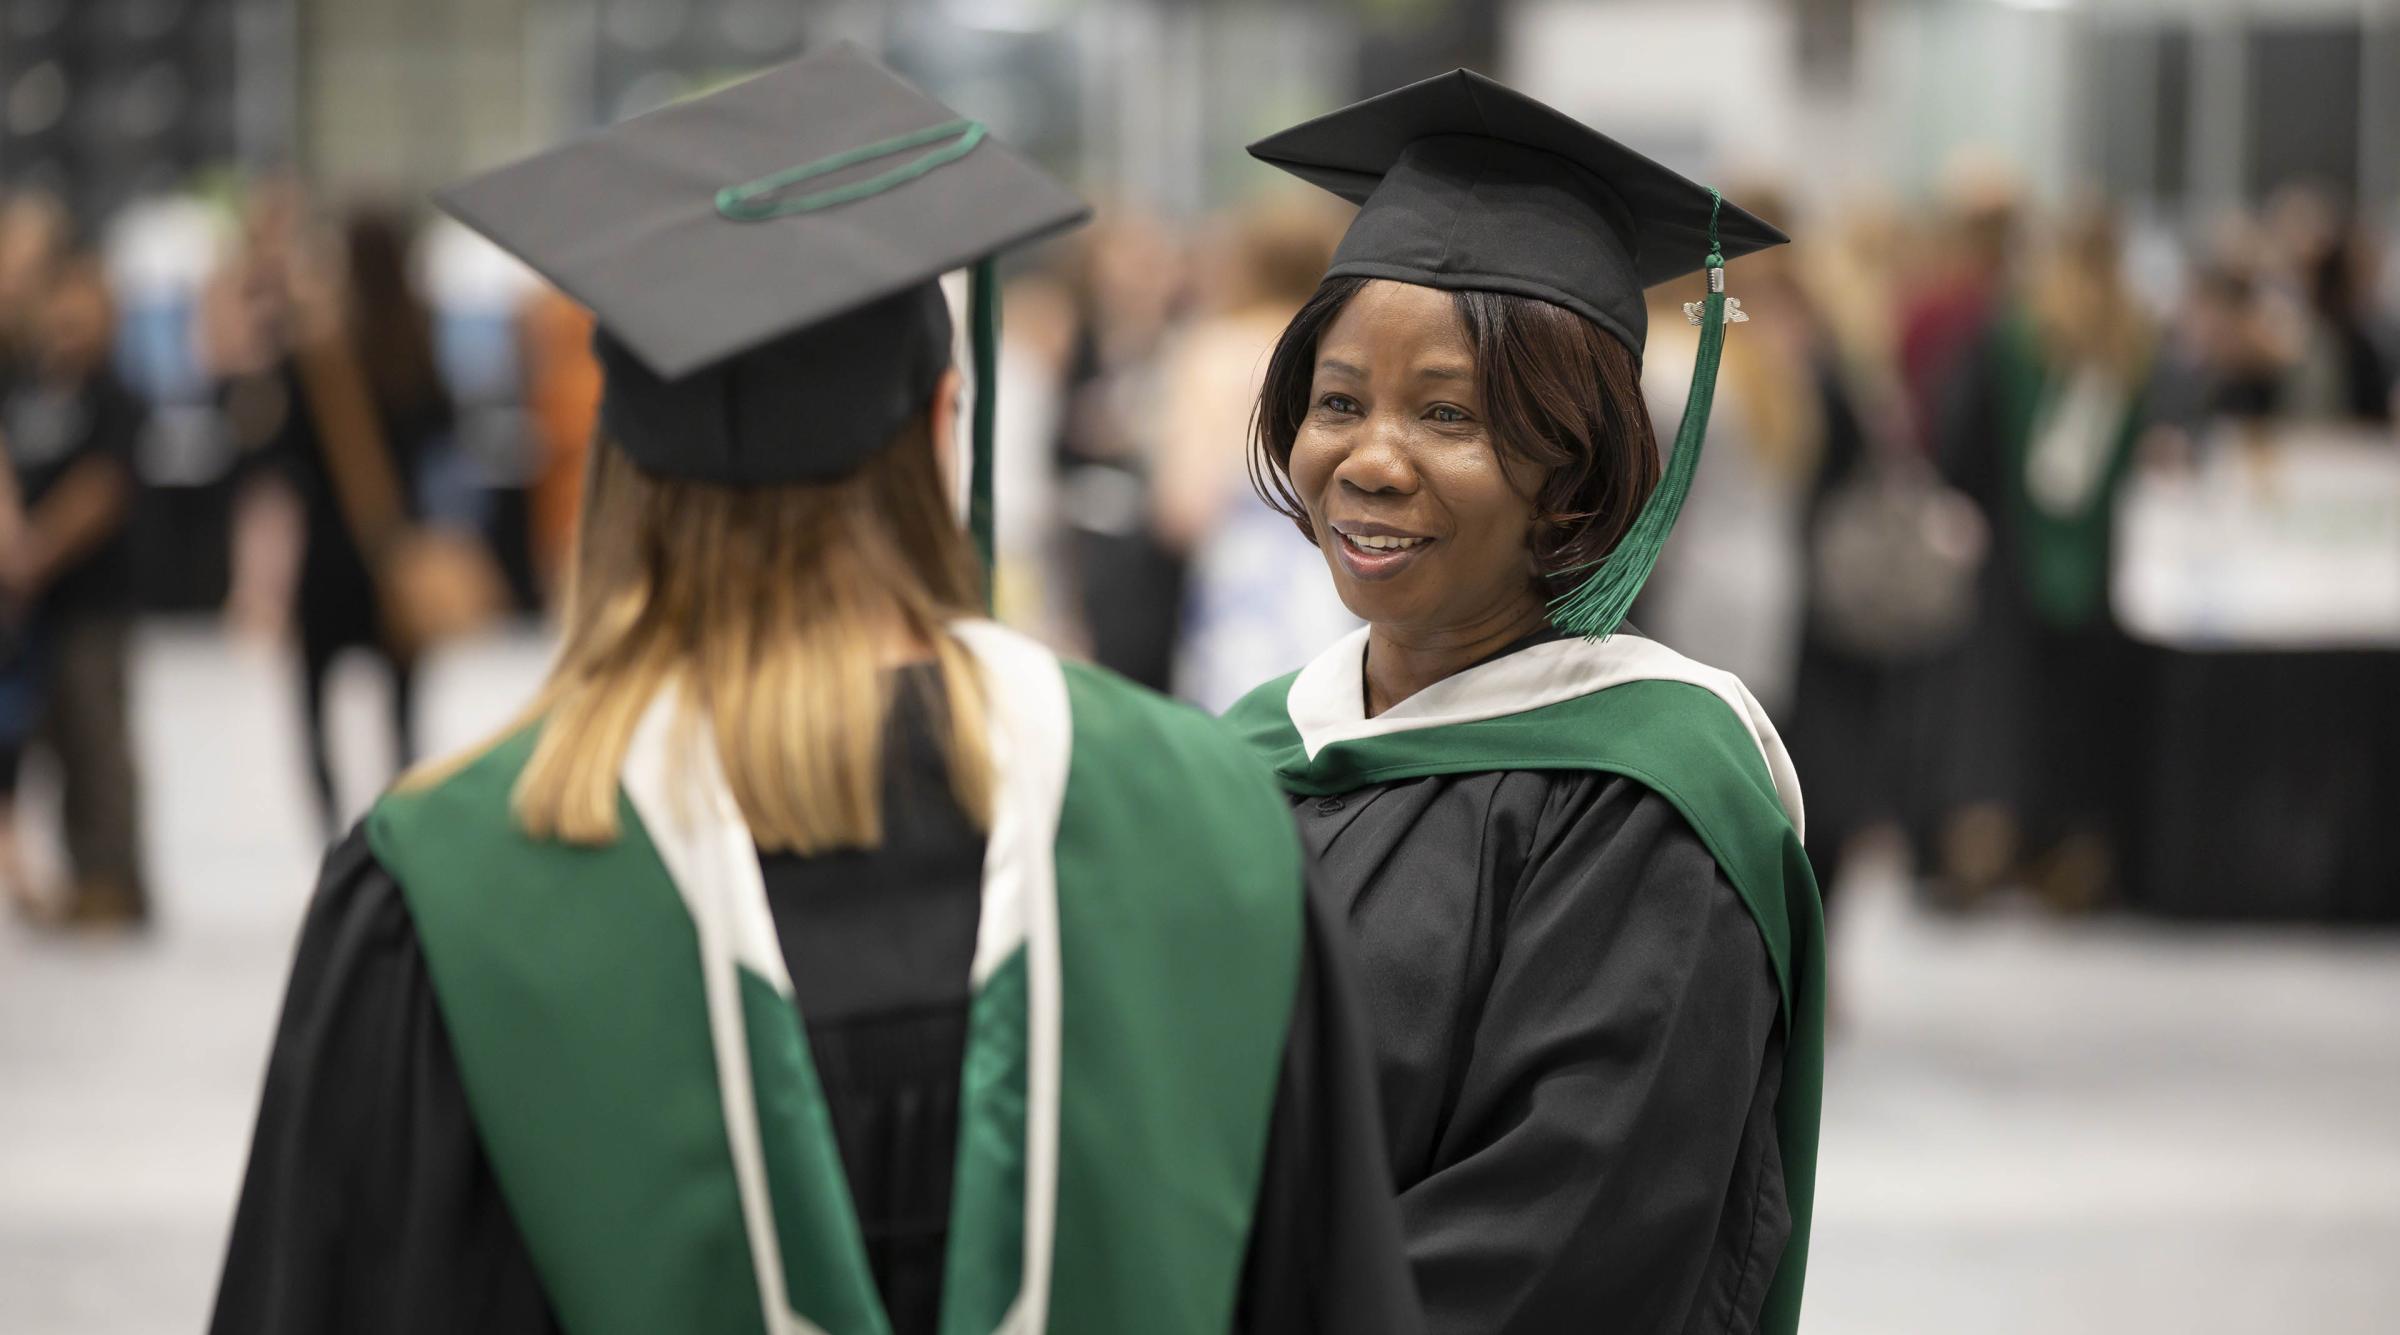 Two female students wearing convocation gowns in conversation